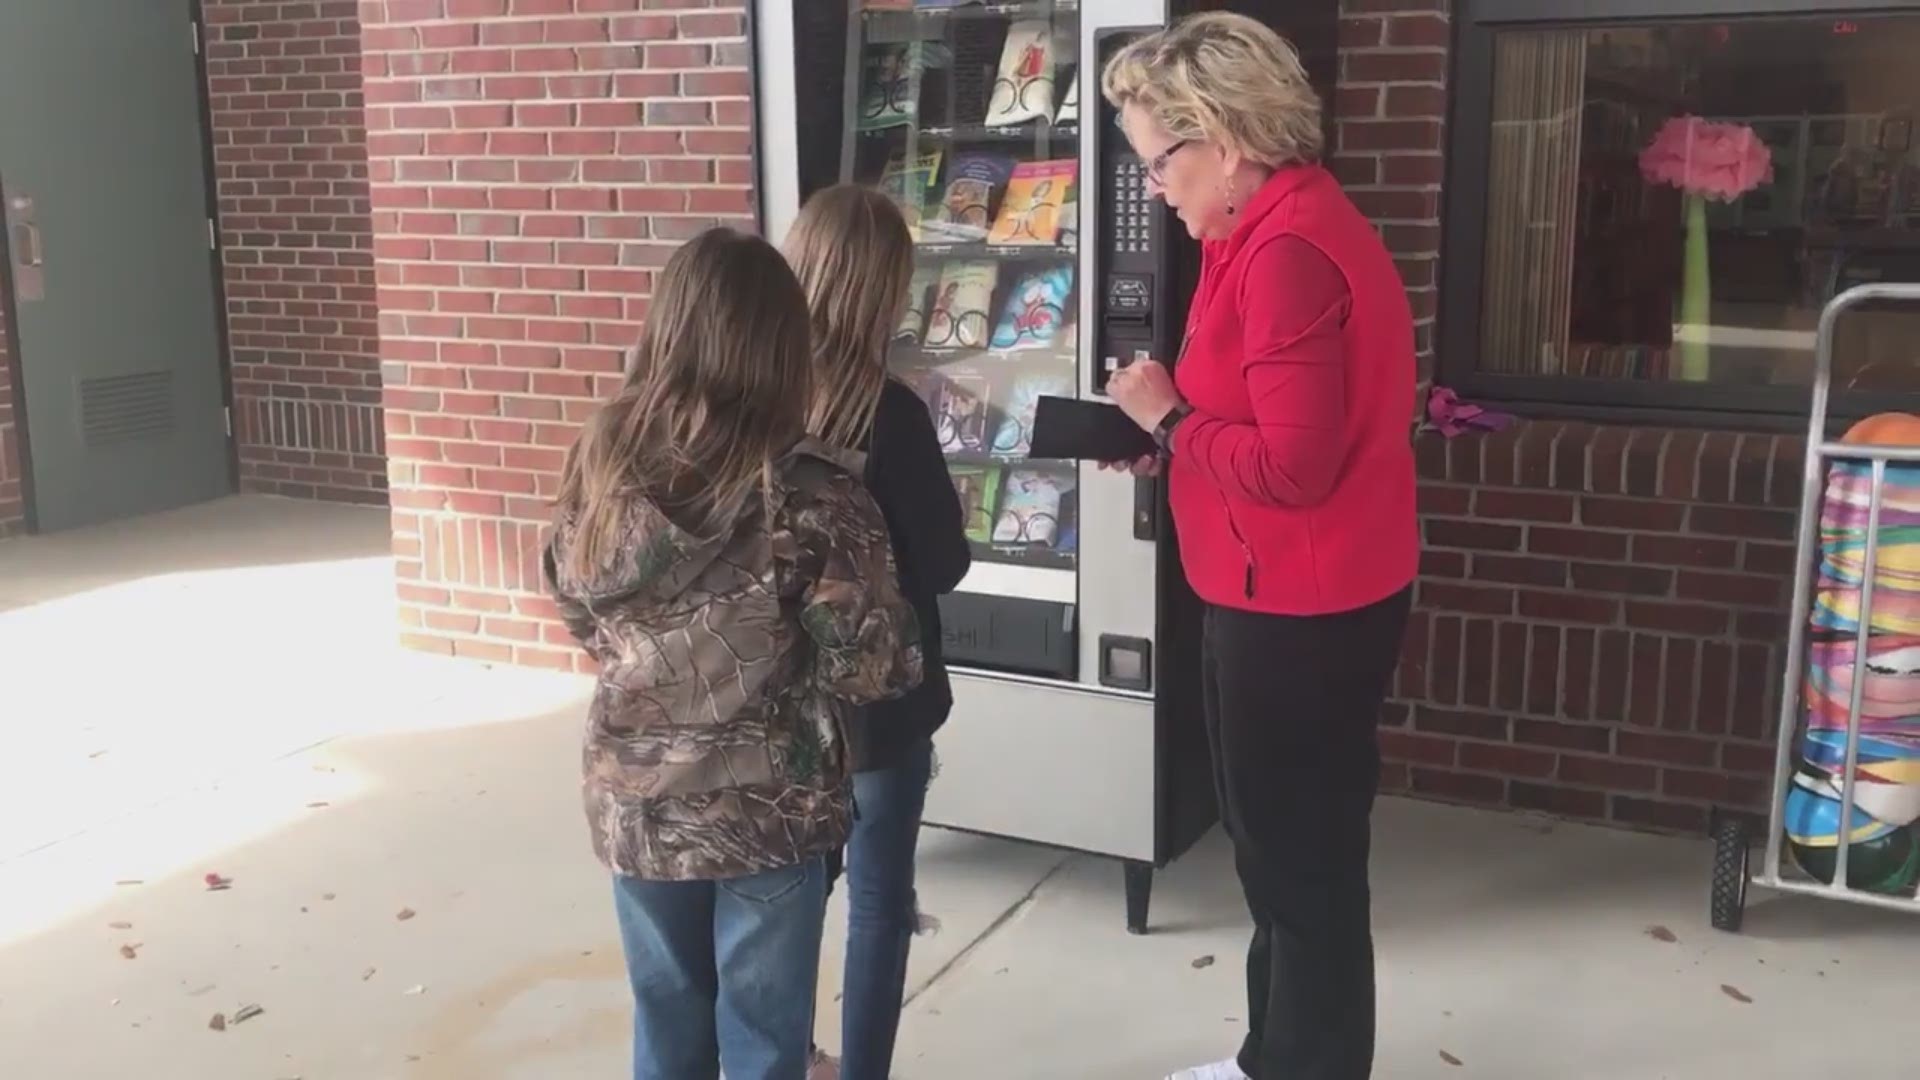 The vending machine at Umatilla Elementary School started dispensing books to students as part of the state’s literacy week.